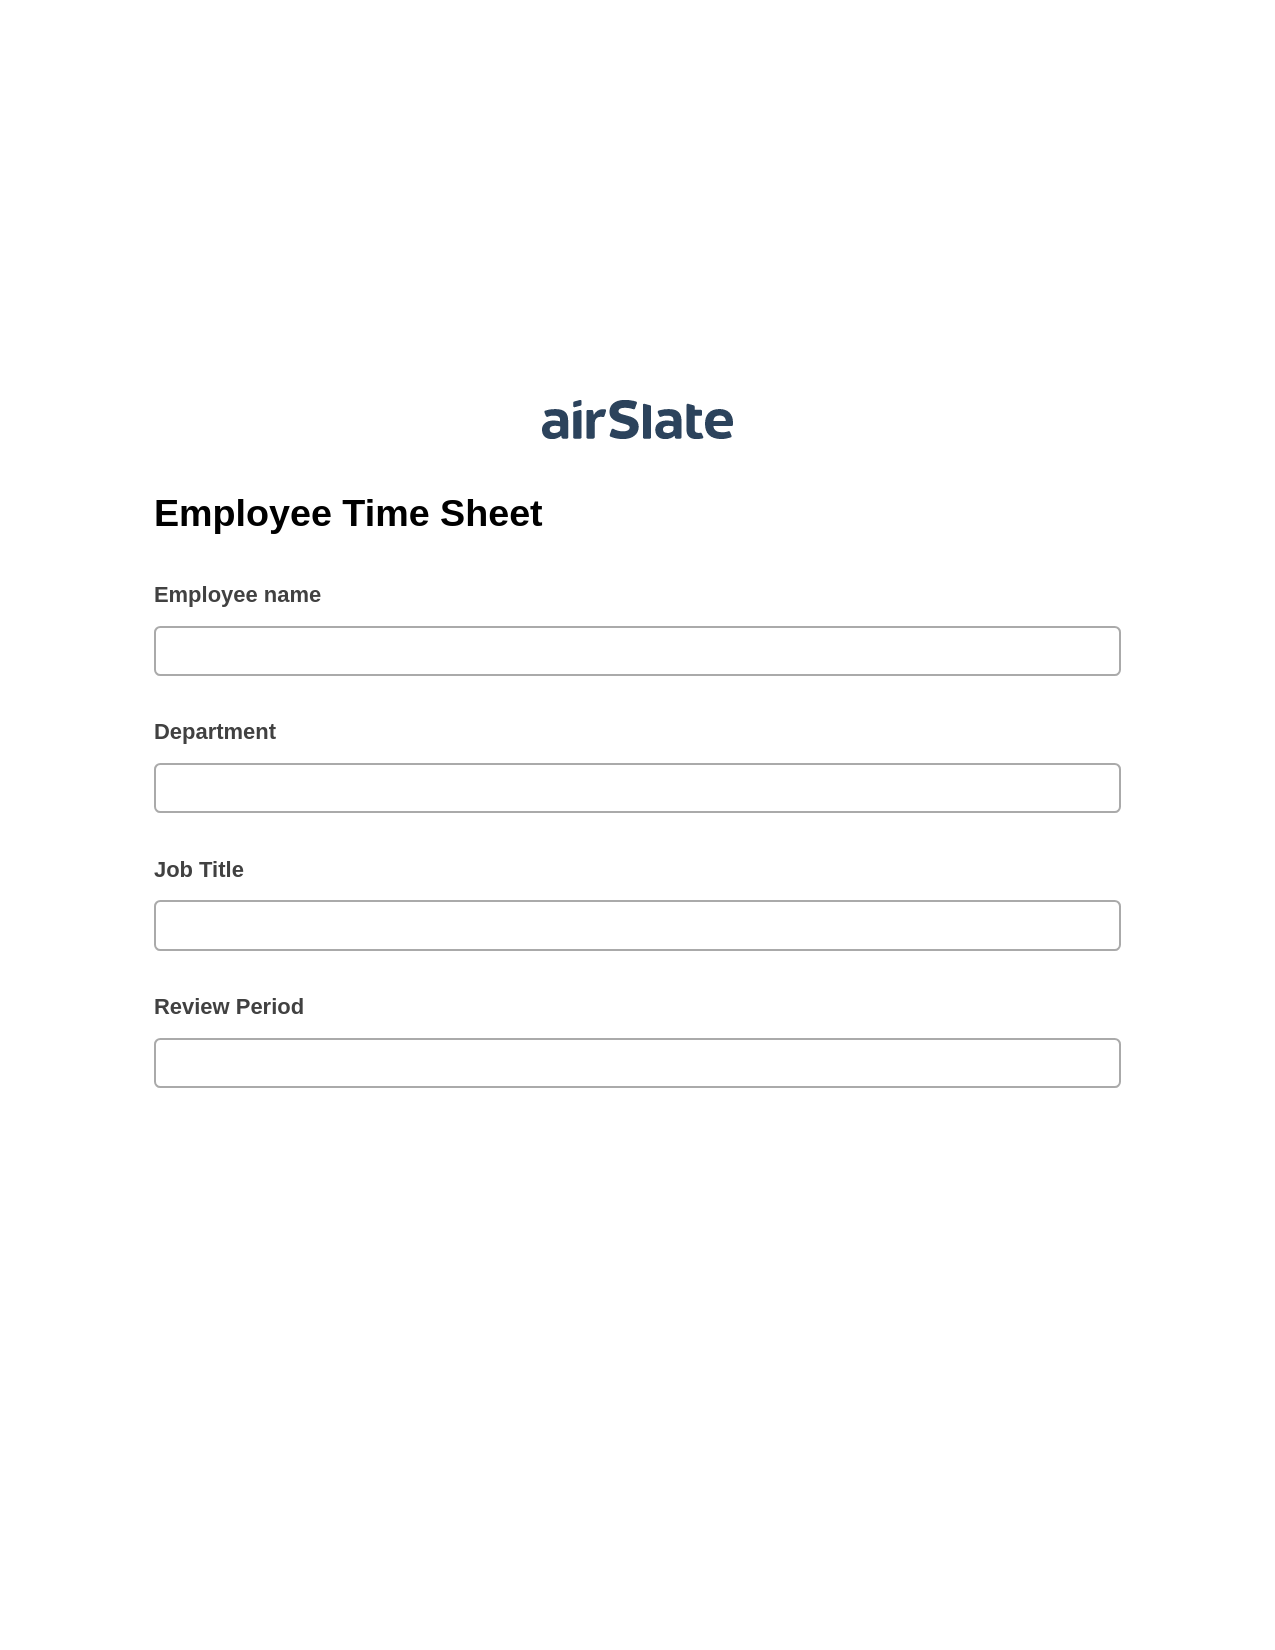 Employee Time Sheet Pre-fill from Salesforce Records Bot, Google Cloud Print Bot, Archive to SharePoint Folder Bot